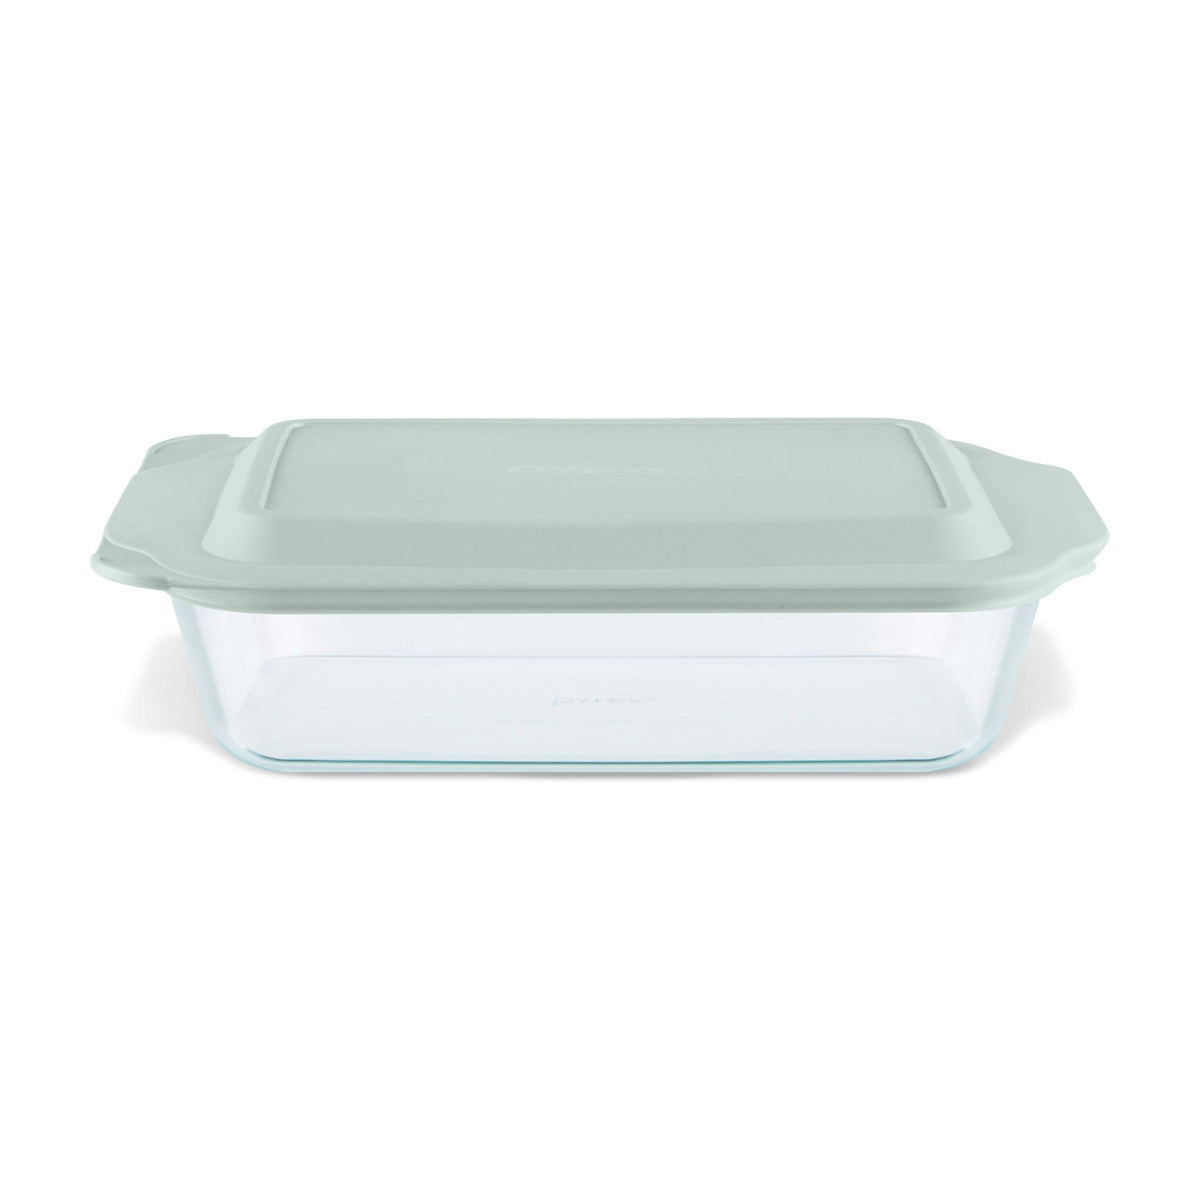 Pyrex Deep 7 x 11" Rectangle Glass Baking Dish with Sage Green Lid